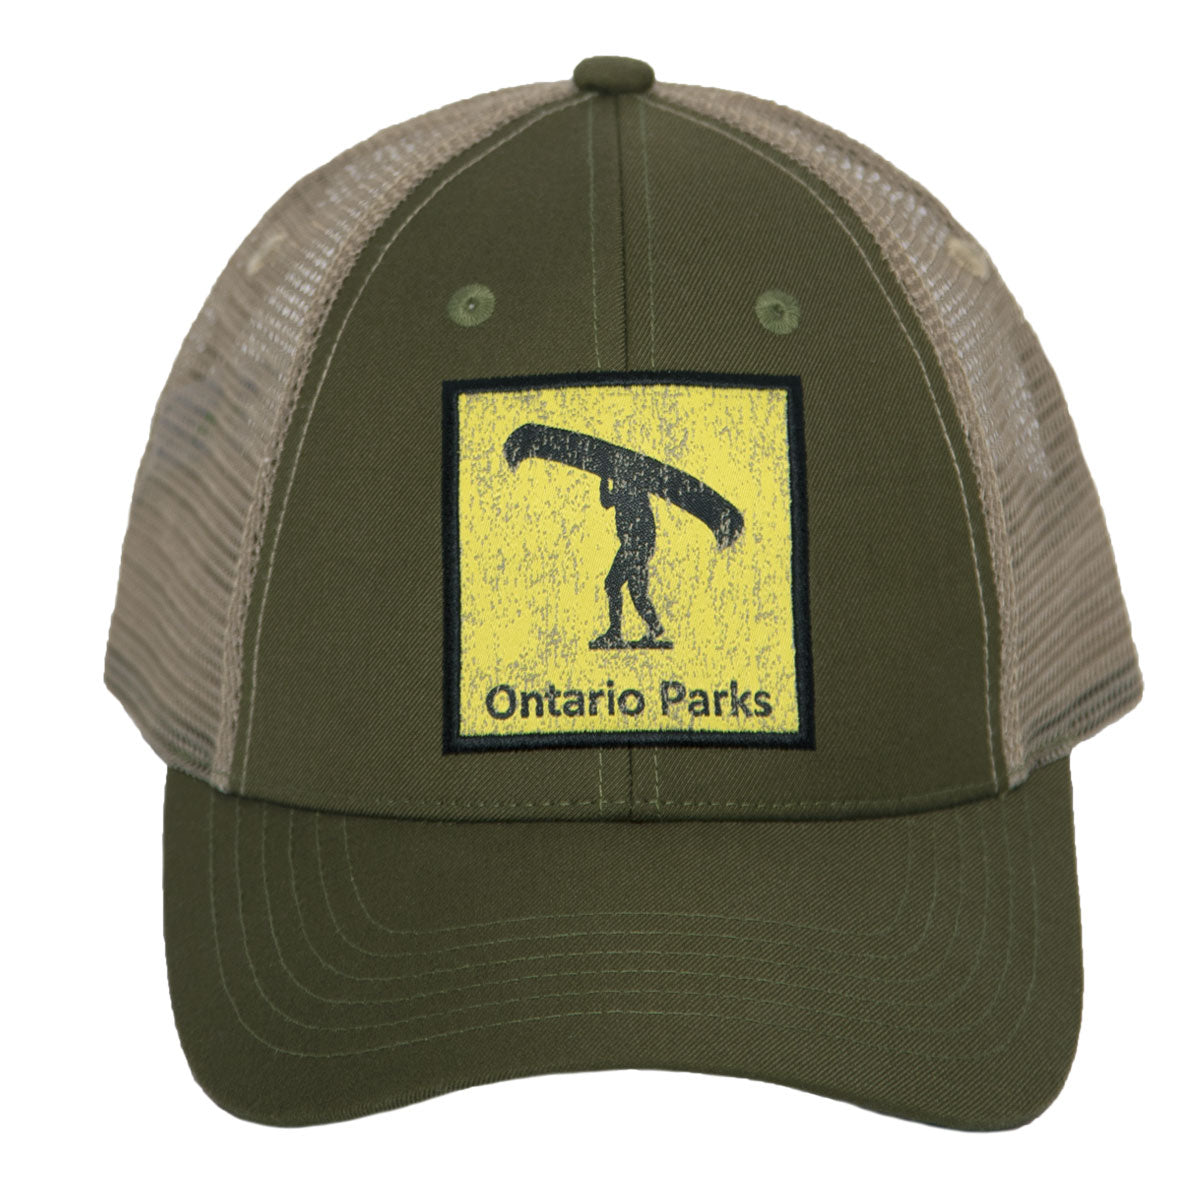 Front of mesh-back Portage emblem ball cap. Weathered yellow/black Portage symbol (man carrying canoe) is embroidered on the front of this Olive green and beige hat.